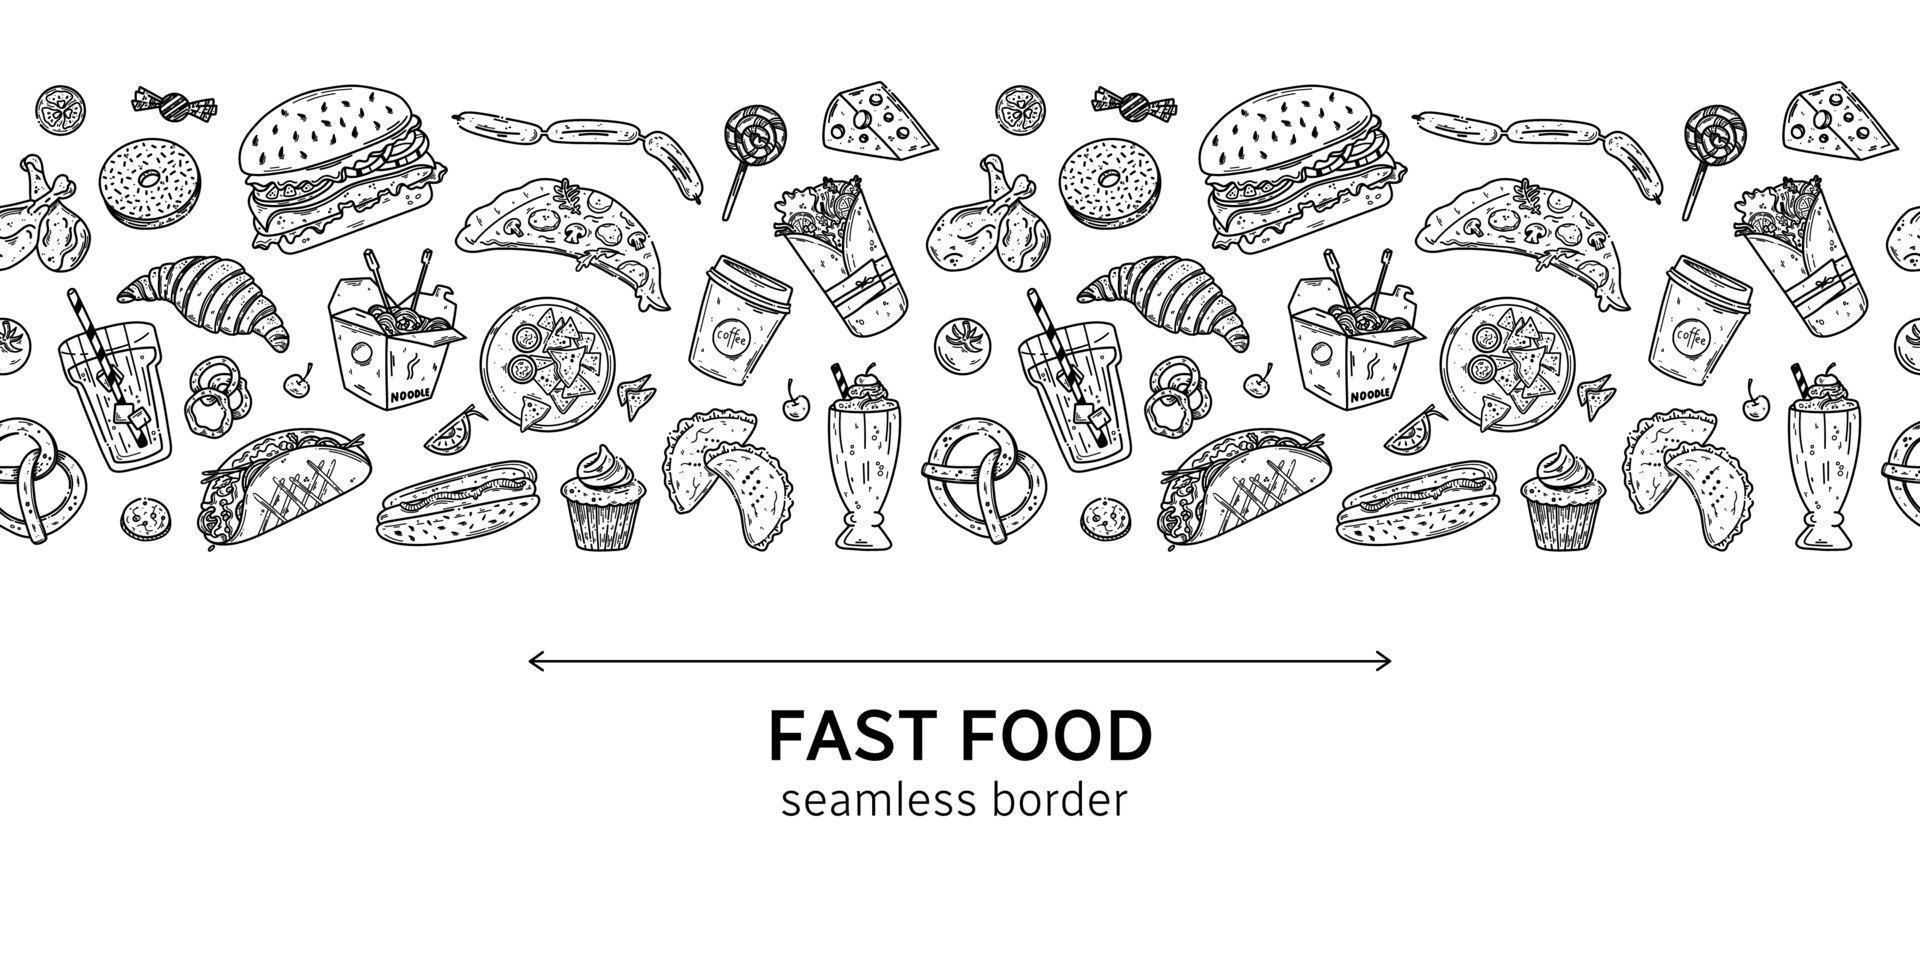 Fast food seamless border with vector hand drawn sandwich, pizza, french fries, donuts, burger, hot dog, noodle, coffe and cupcake